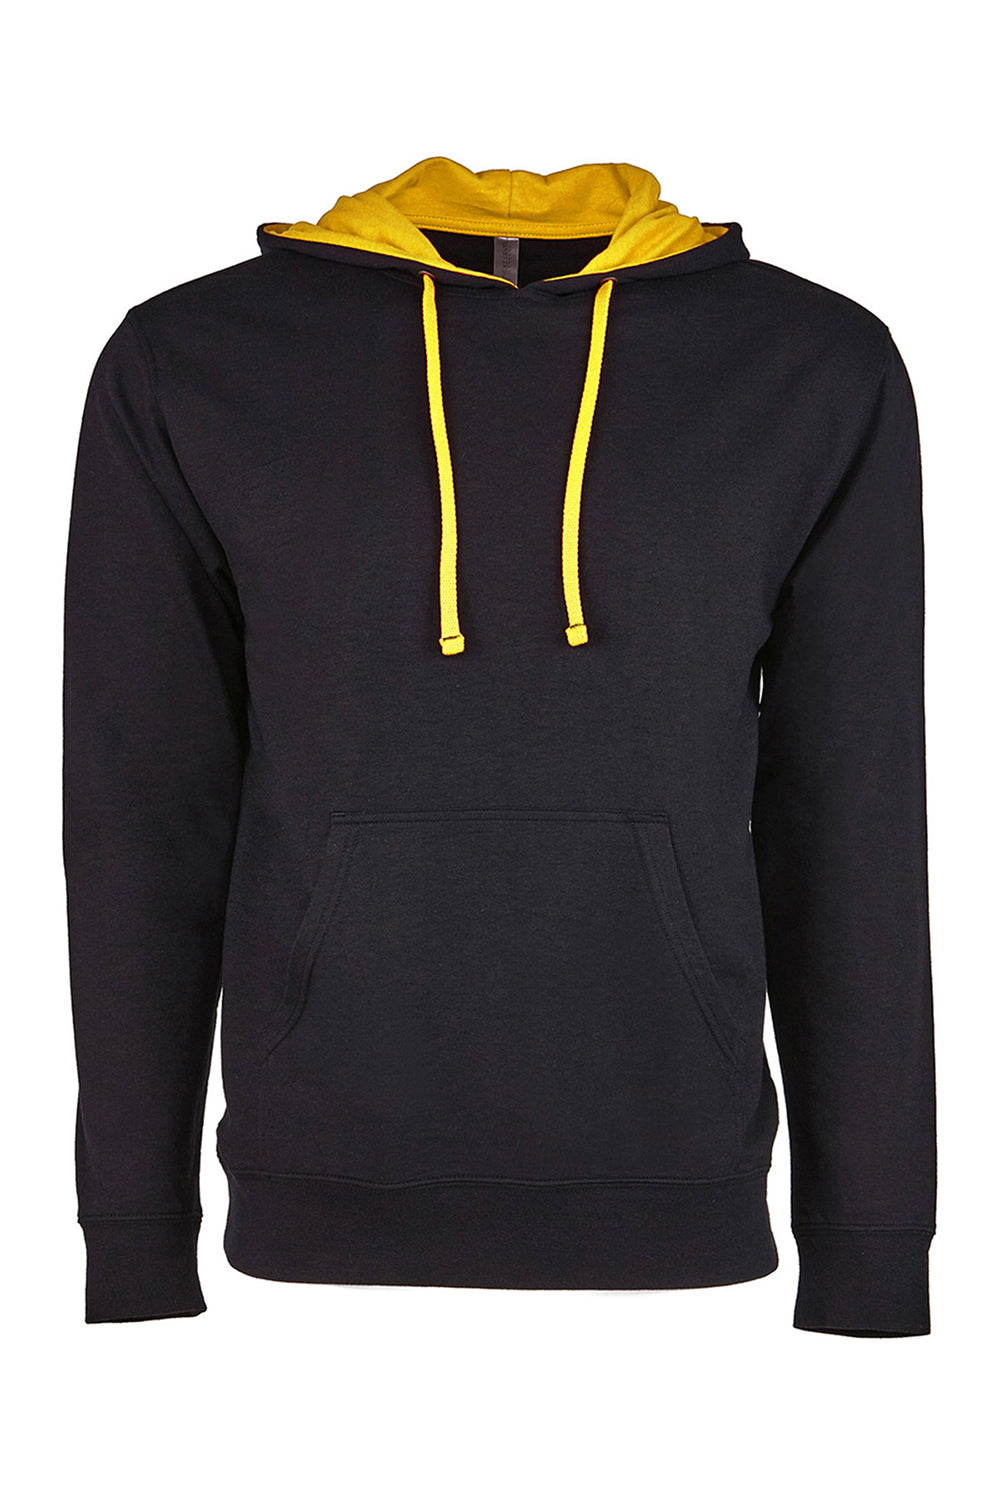 Next Level 9301 Mens French Terry Fleece Hooded Sweatshirt Hoodie Black/Gold Flat Front